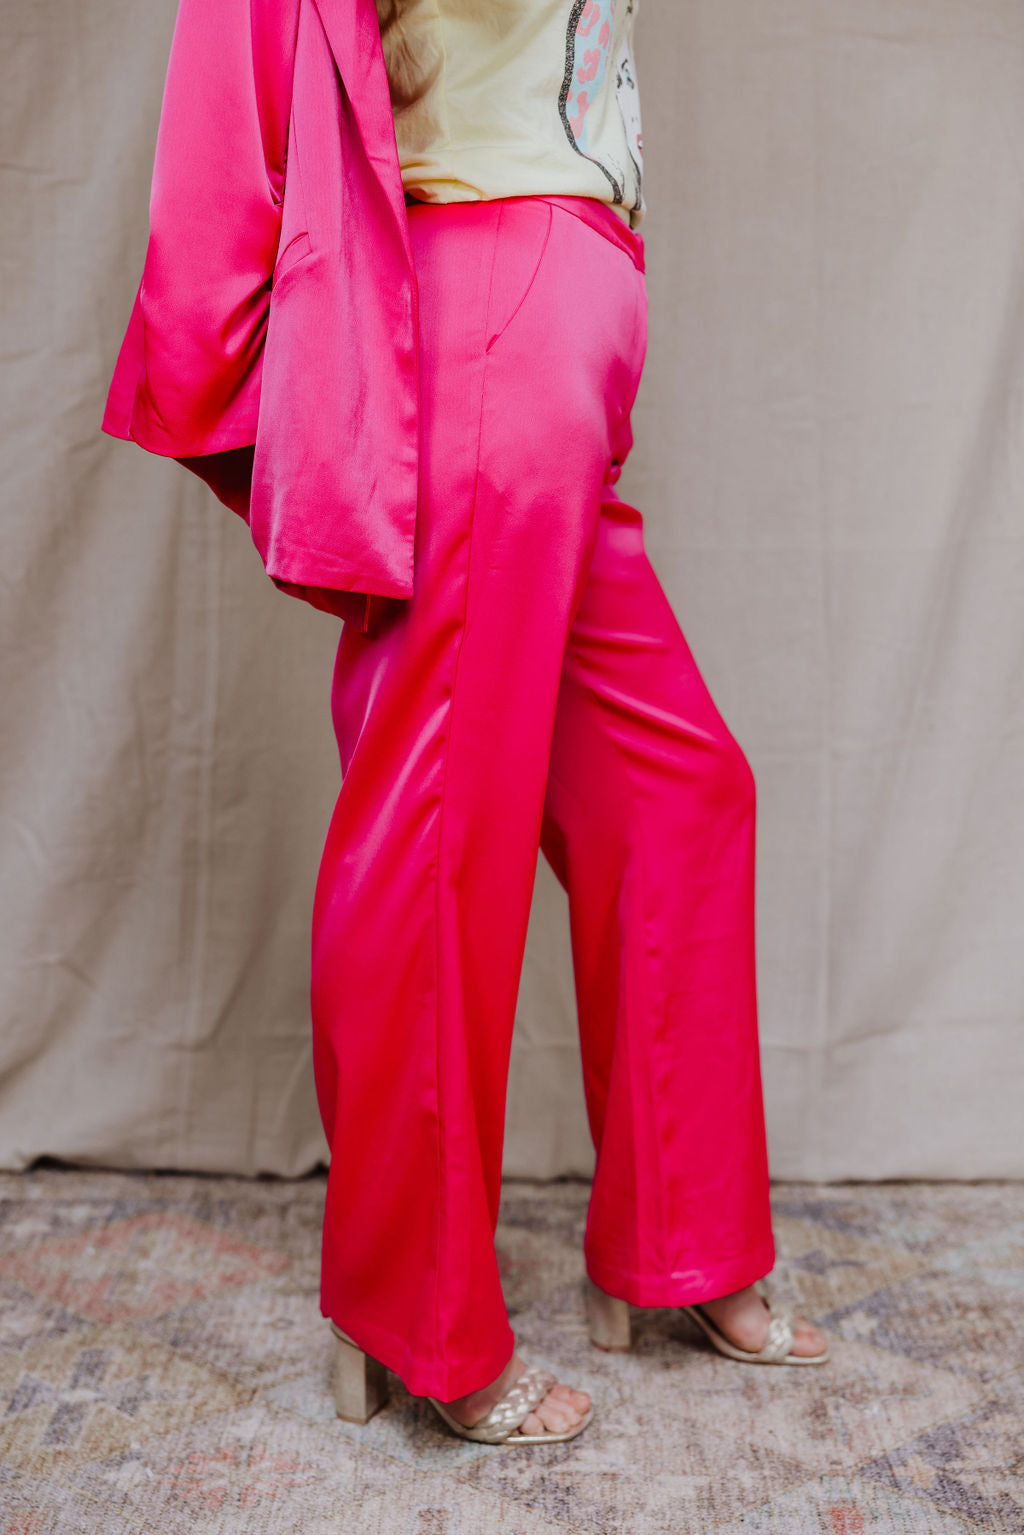 Making Time Plain Front Satin Trousers - Hyper pink